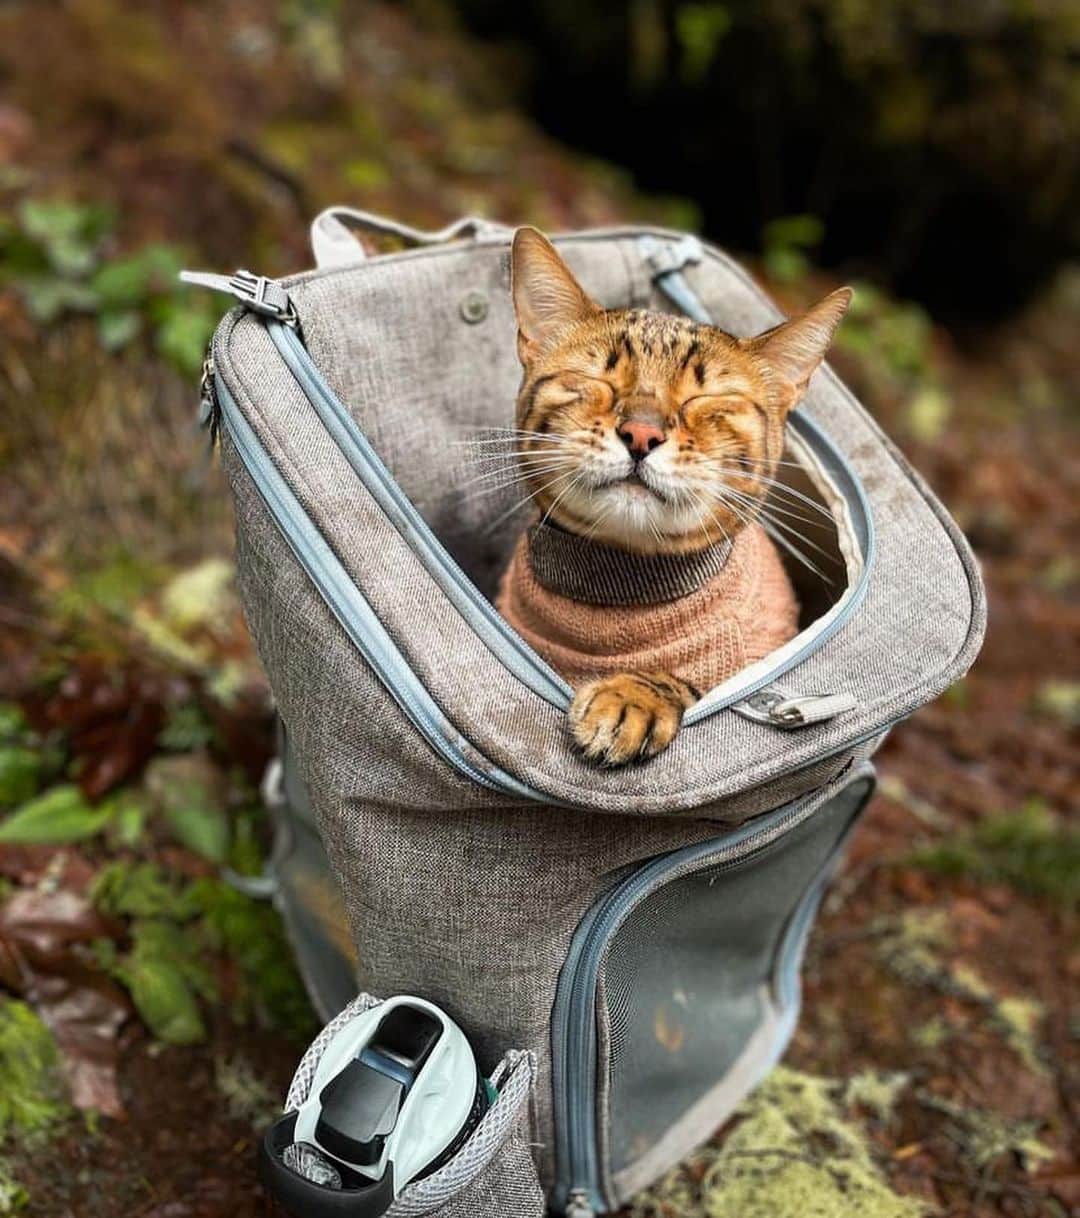 Bolt and Keelのインスタグラム：「Meet Kazuki! 🍂 This adventure kitty has traveled to 42 states, 2 countries, and 42 national parks!🌄 @adventrapets ➡️ @kazuki_the_bengal  —————————————————— Follow @adventrapets to meet cute, brave and inspiring adventure pets from all over the world! 🌲🐶🐱🌲  • TAG US IN YOUR POSTS to get your little adventurer featured! #adventrapets ——————————————————」